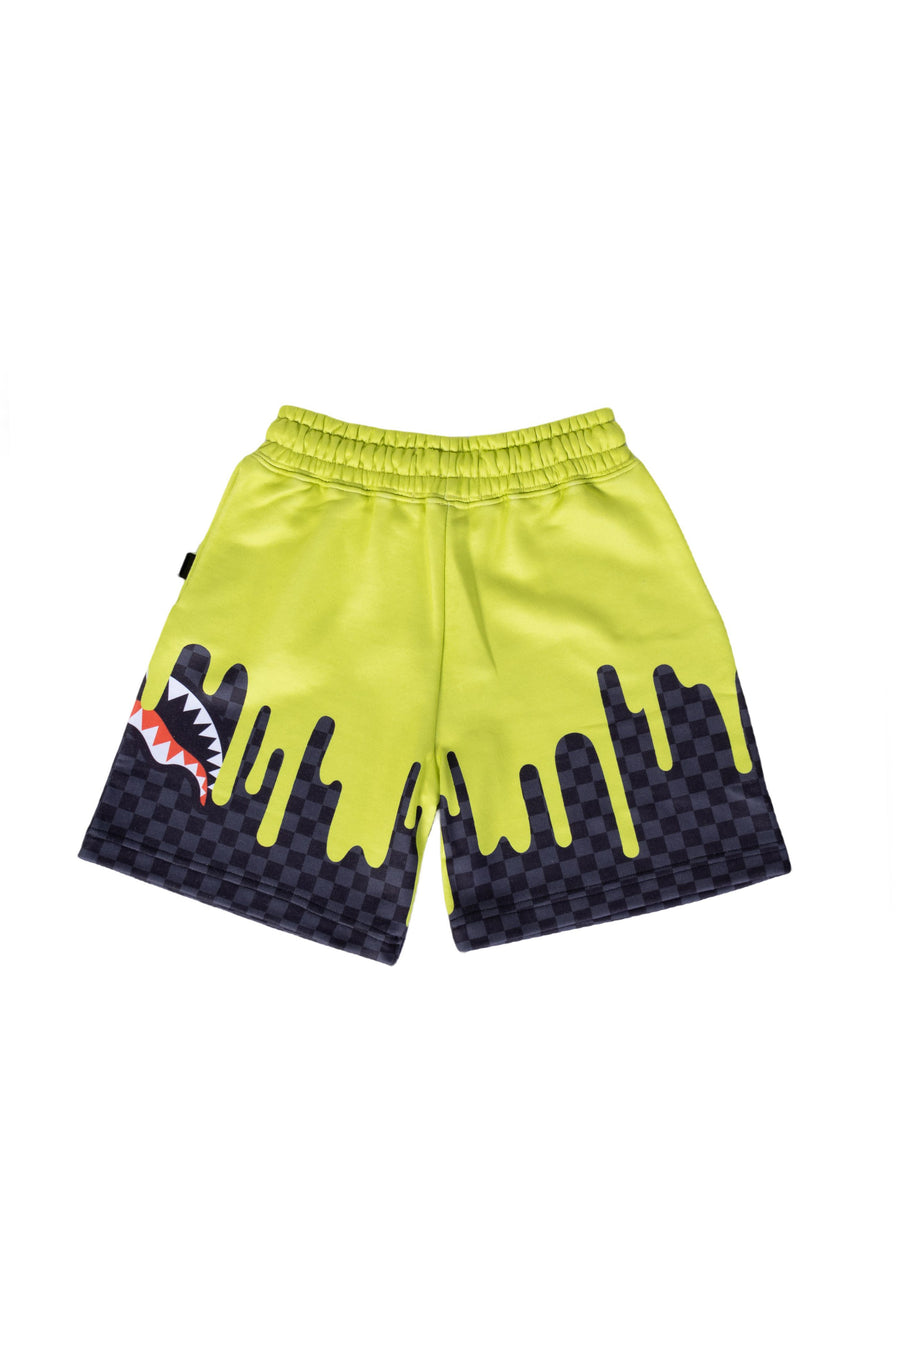 Youth - Sprayground Short COLOR DRIPPING GREY CHECK SHORTS YOUTH Green